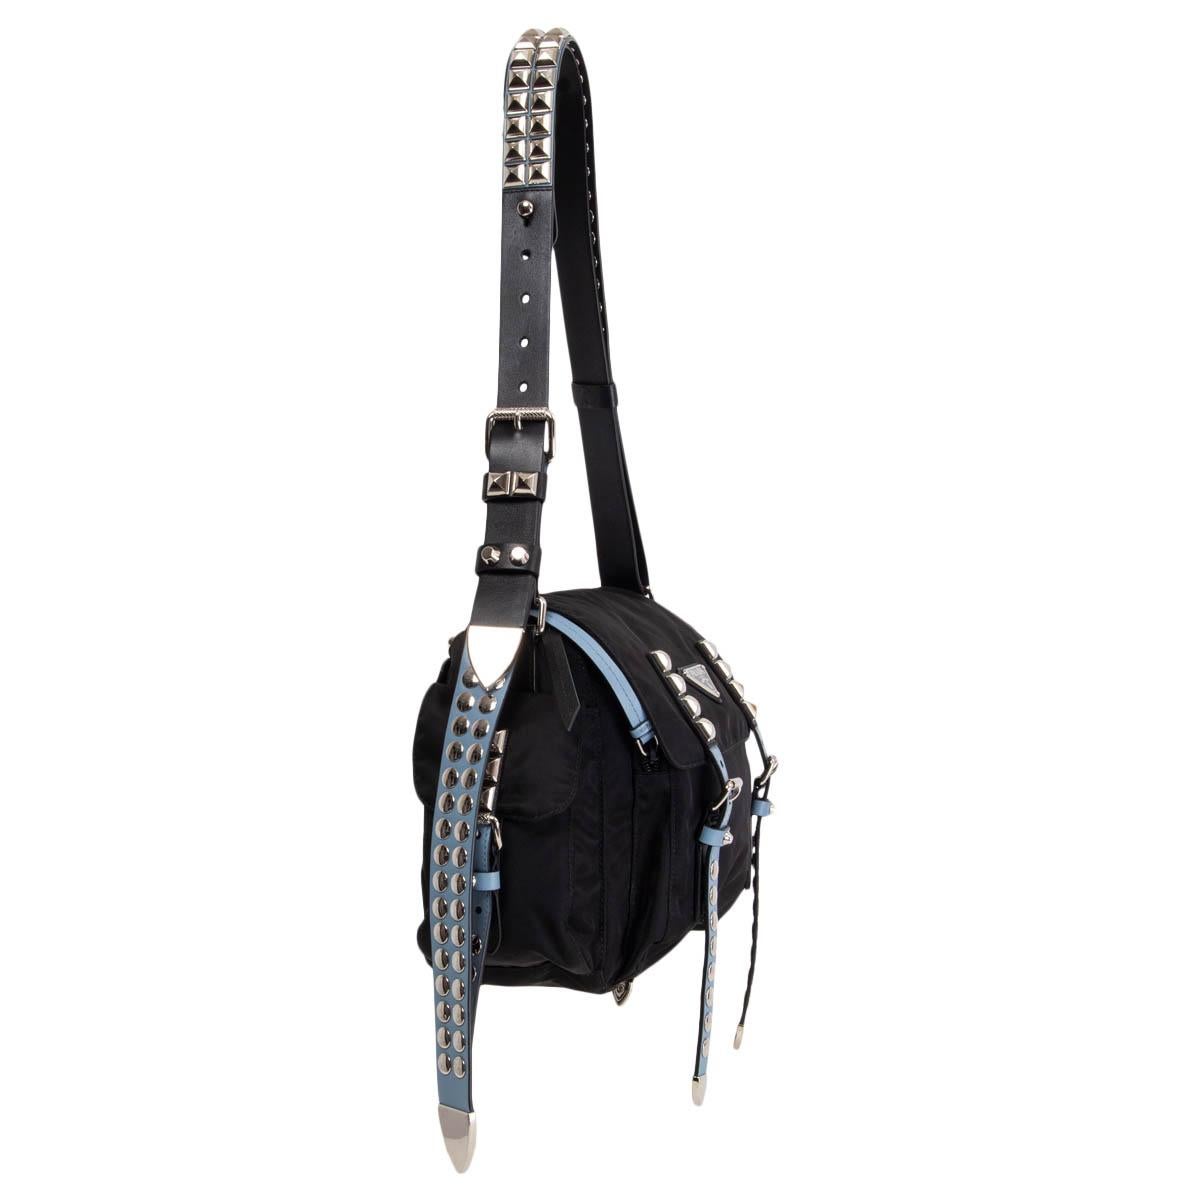 100% authentic Prada 'New Vela Studded' messenger bag in black nylon with black, Astrale (light blue) and white leather straps embellished with silver-tone studds. Opens with a zipper under the flap and is lined in classic black logo nylon with one